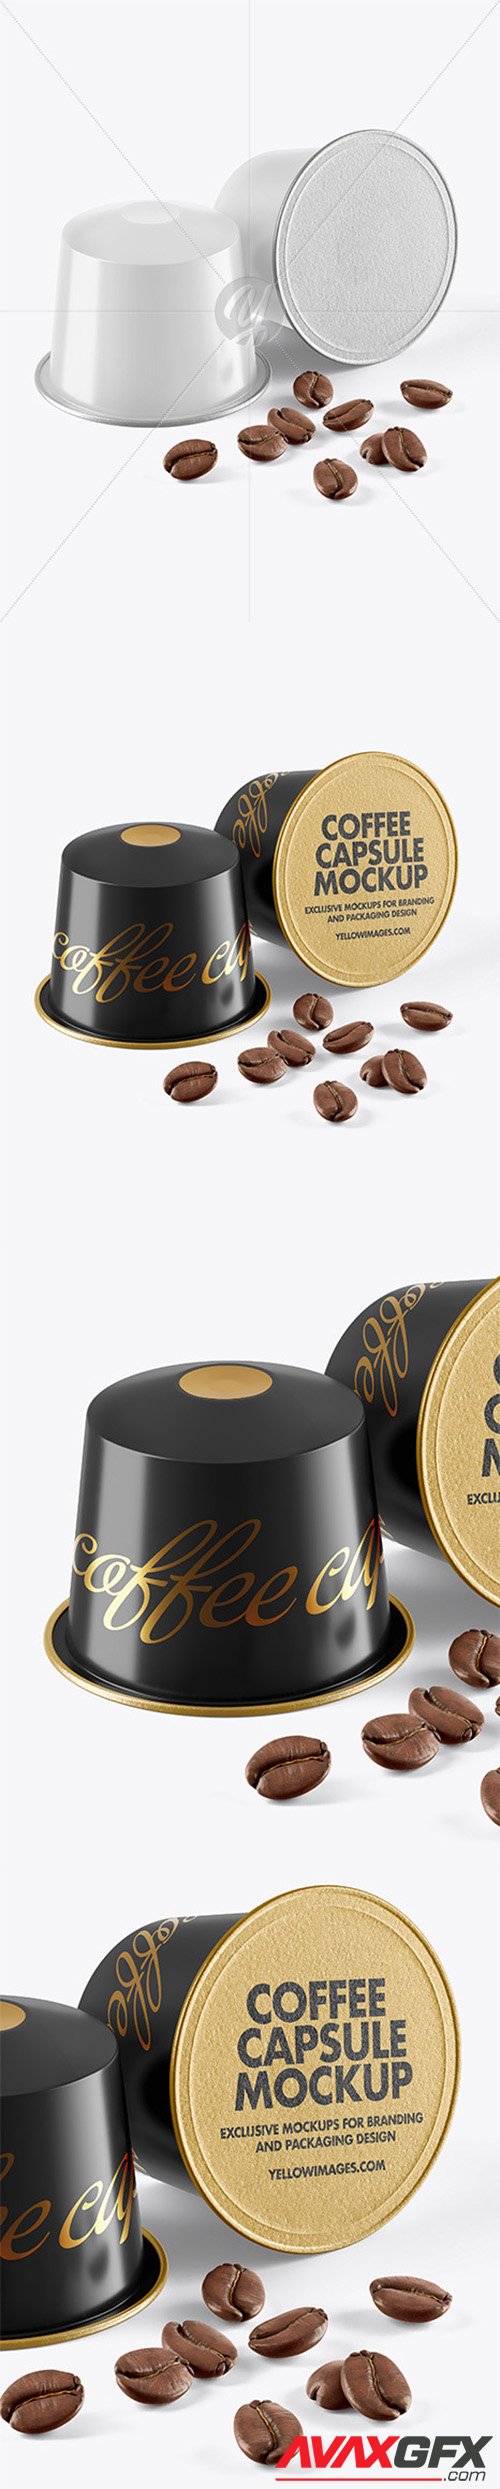 Paper Box W Coffee Capsules Mockup 58321 Avaxgfx All Downloads That You Need In One Place Graphic From Nitroflare Rapidgator